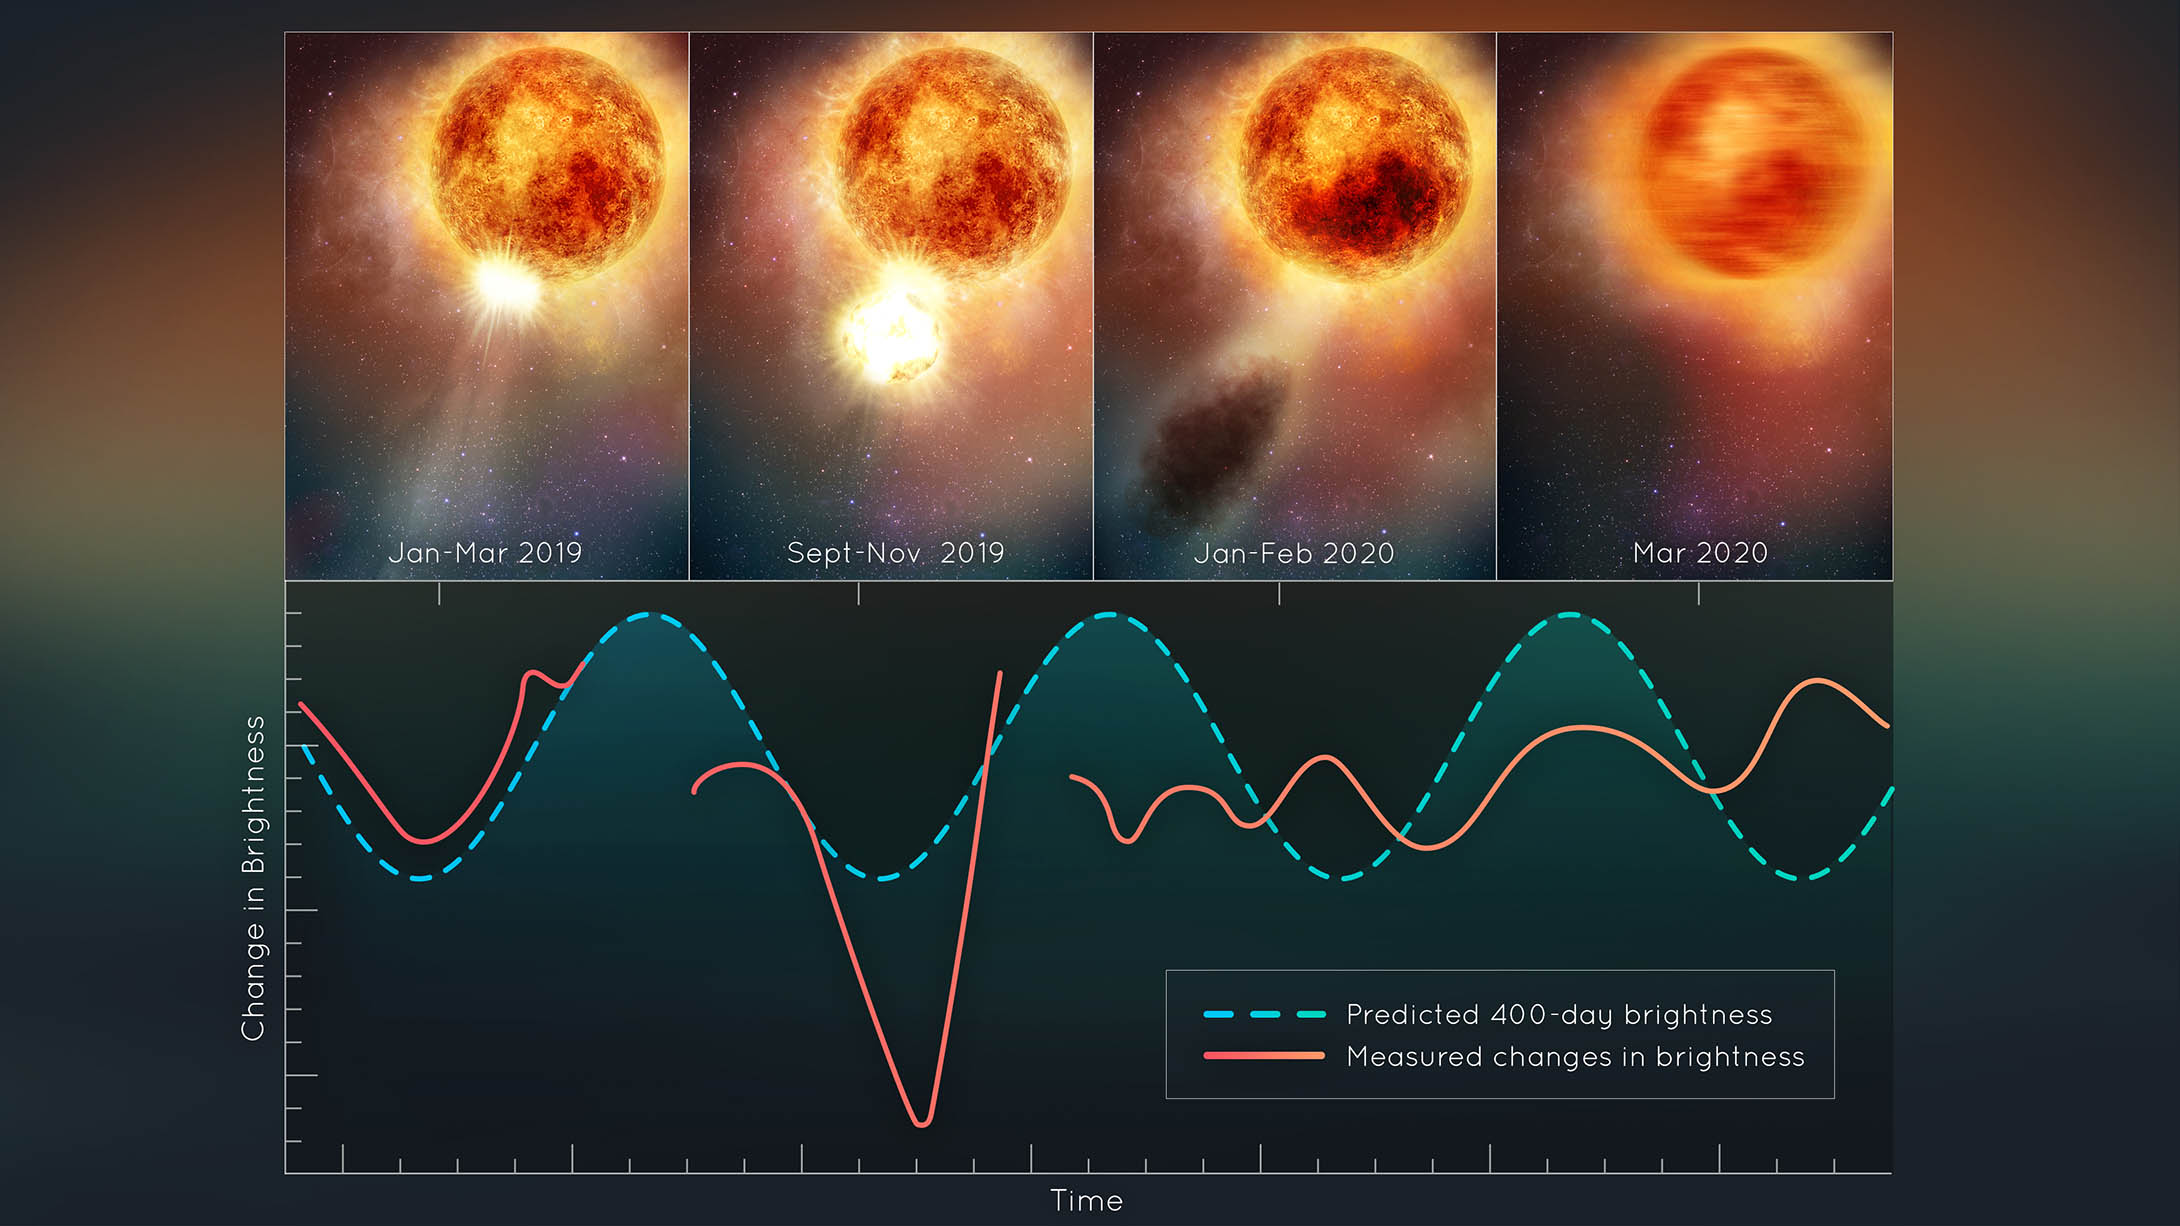 This artist's illustration plots the disruption of the red supergiant star Betelgeuse following the titanic mass ejection of a large piece of its visible surface. The escaping material cooled to form a dust cloud that temporarily made the star look dimmer as seen from Earth. This unprecedented stellar convulsion disrupted the monster star's 400-day-long brightness oscillation period that astronomers had measured for more than 200 years. The star's interior may now be jiggling like a plate of gelatin dessert.